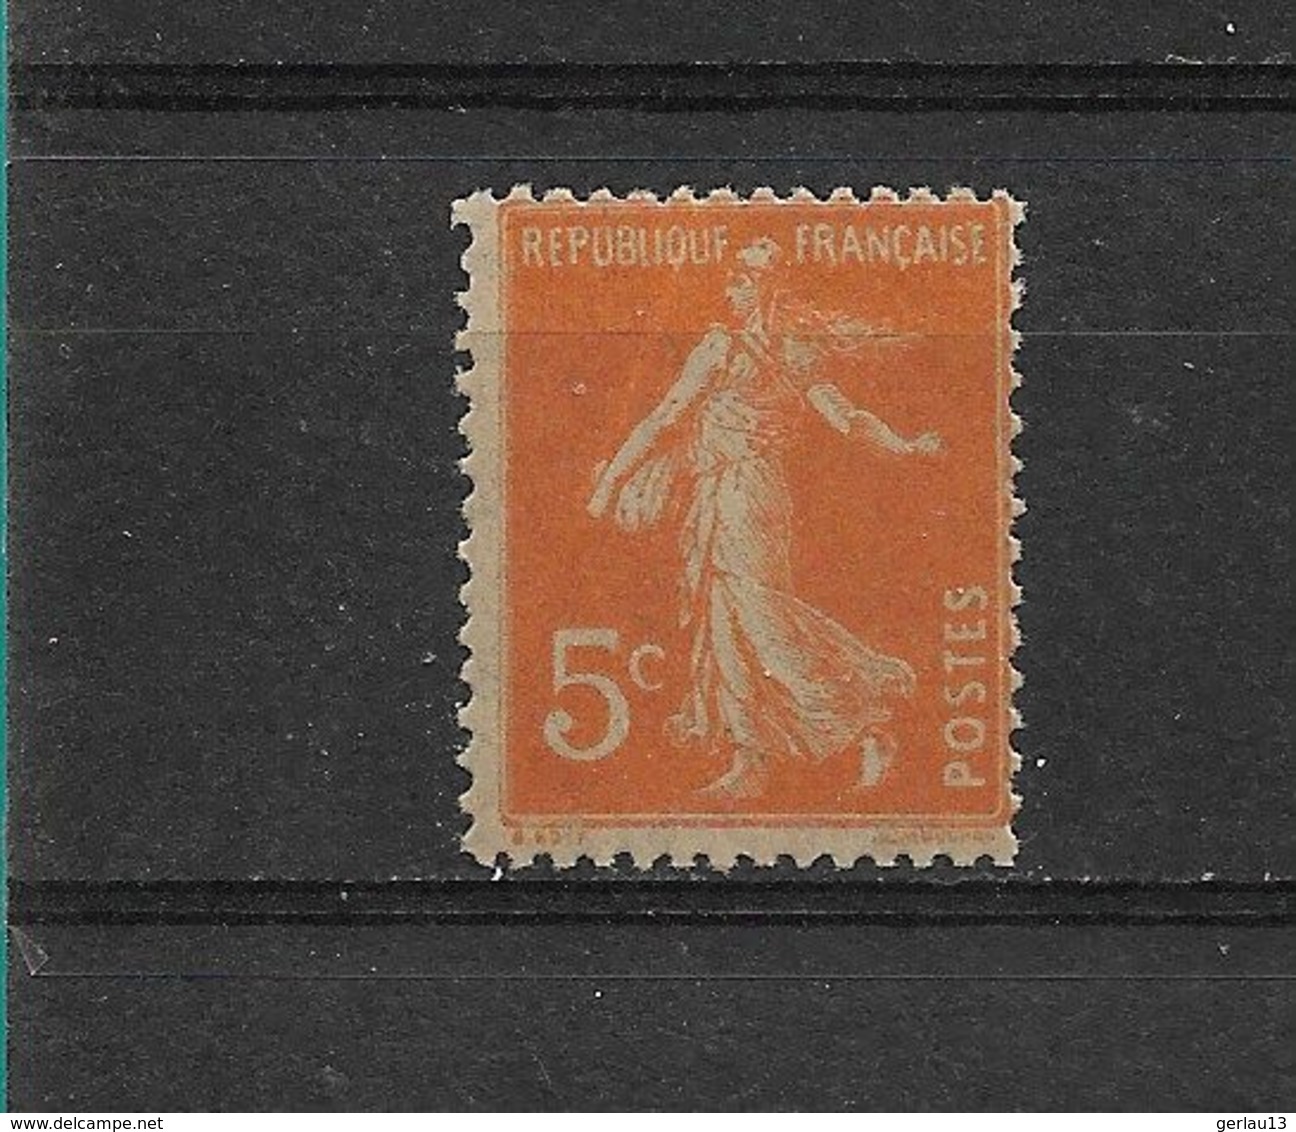 FRANCE    N° 158    NEUF SANS CHARNIERE - 1906-38 Sower - Cameo